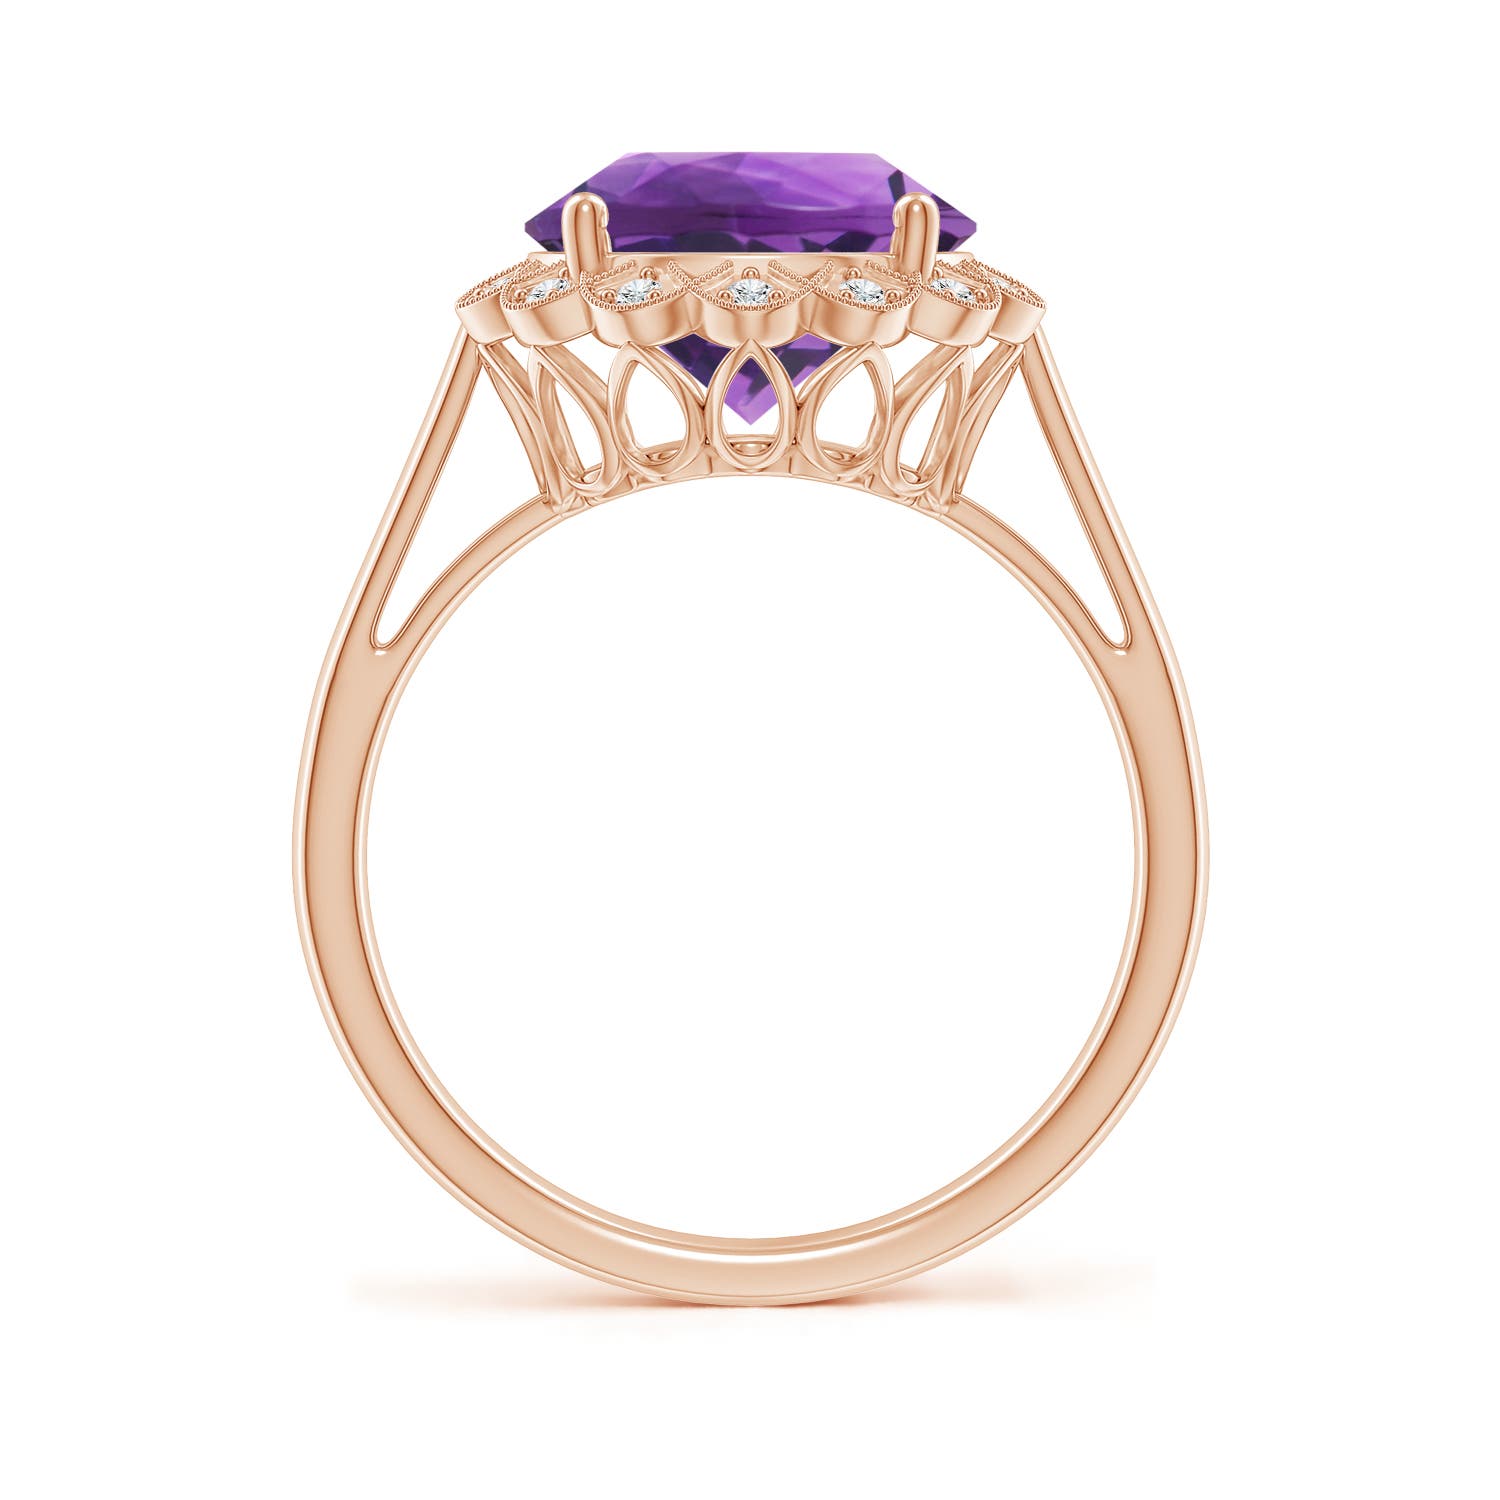 AAA - Amethyst / 3.28 CT / 14 KT Rose Gold